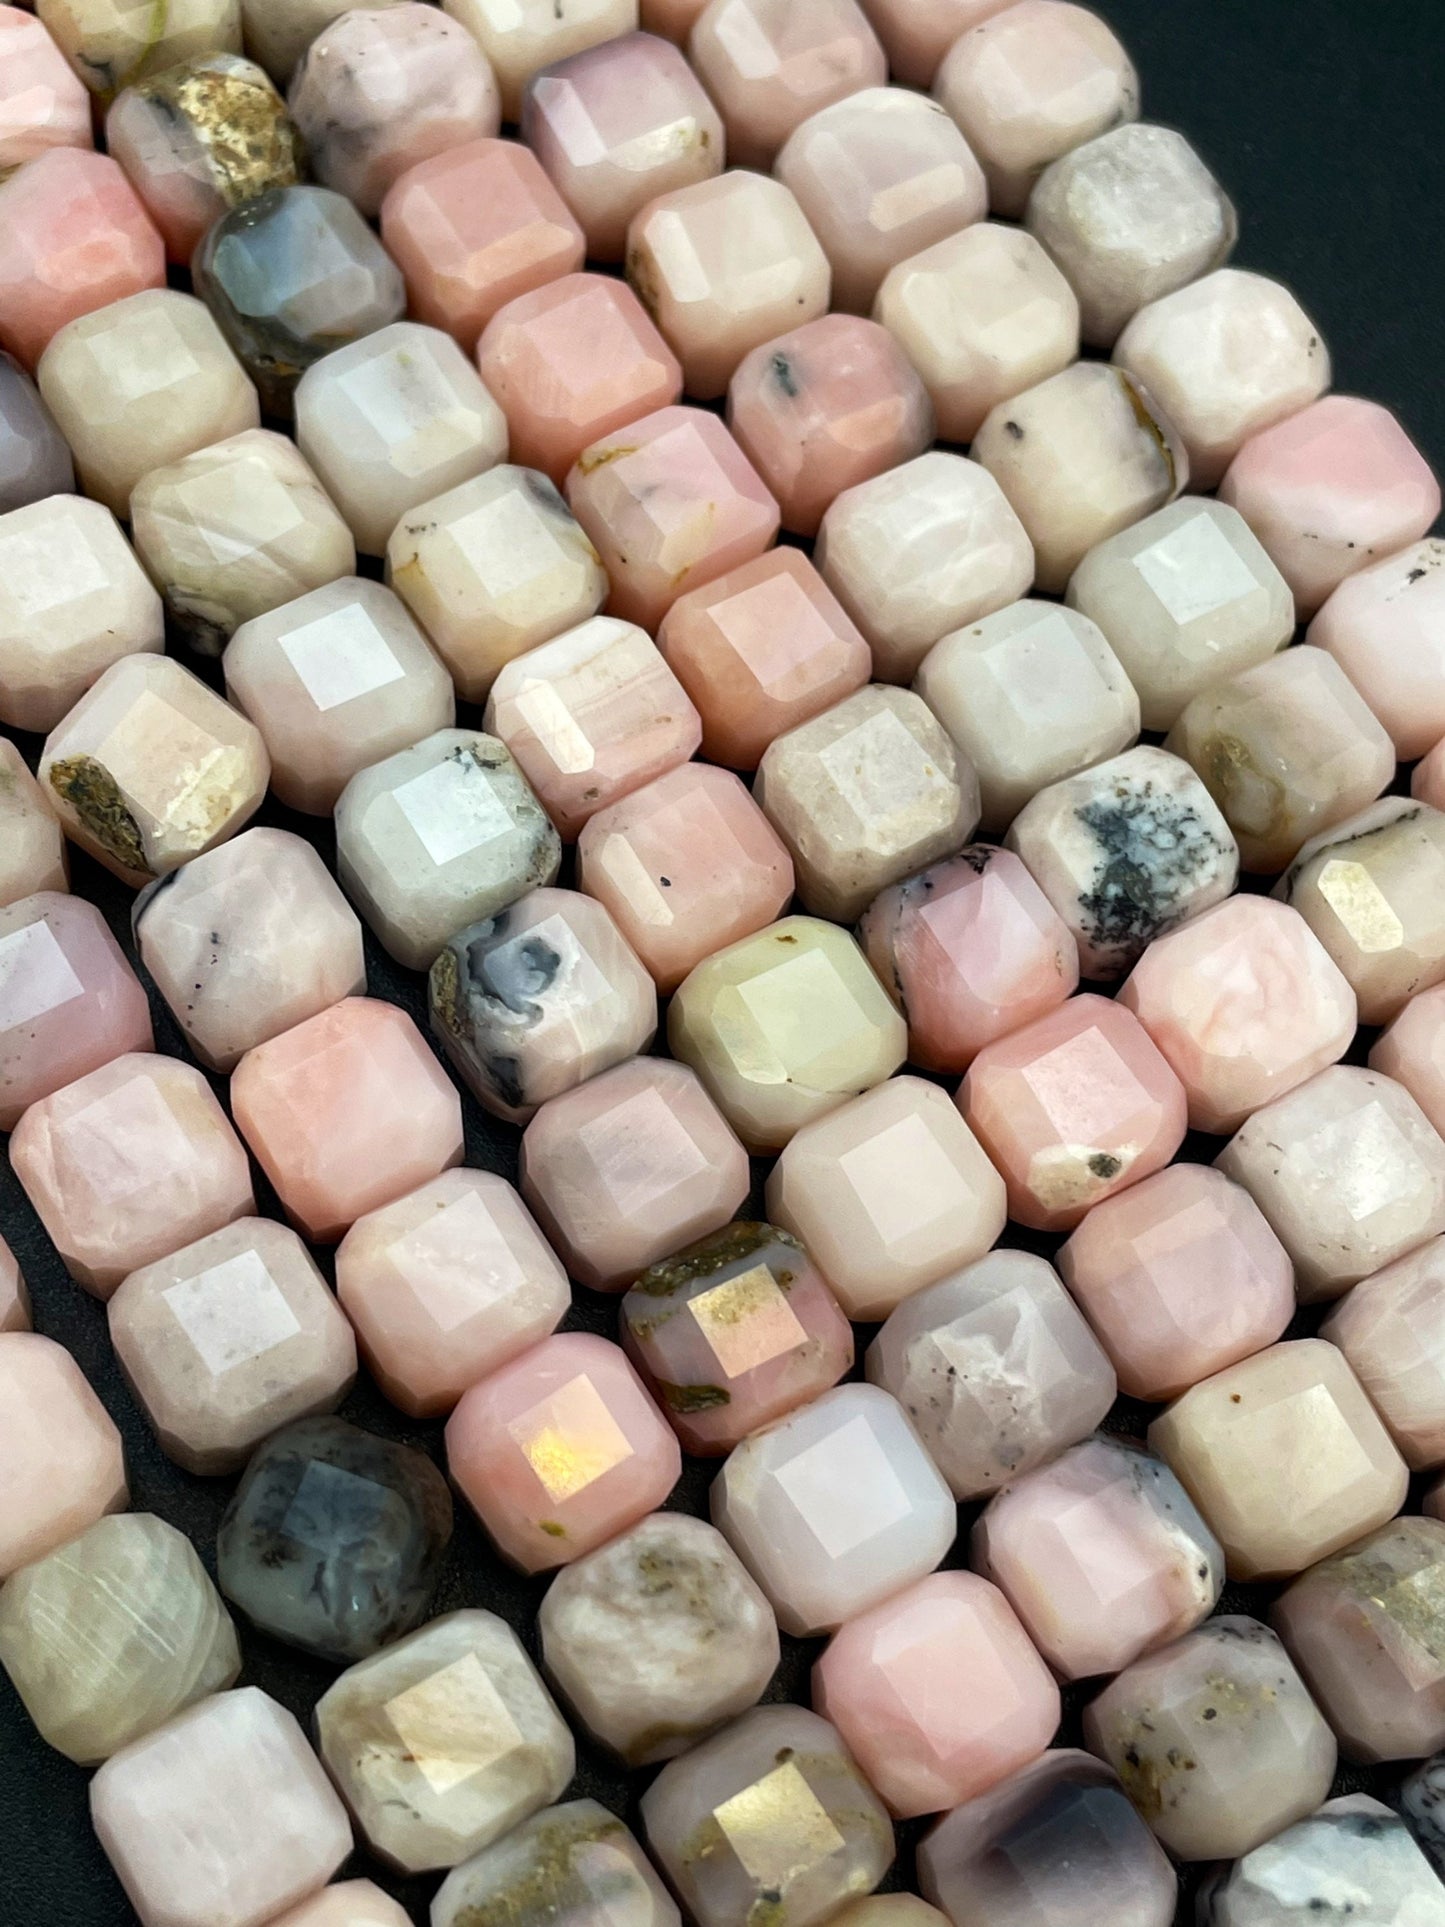 AAA Natural Pink Opal Gemstone Bead Faceted 8mm Cube Shape, Beautiful Natural Pink Color Opal Gemstone Bead, High Quality Beads